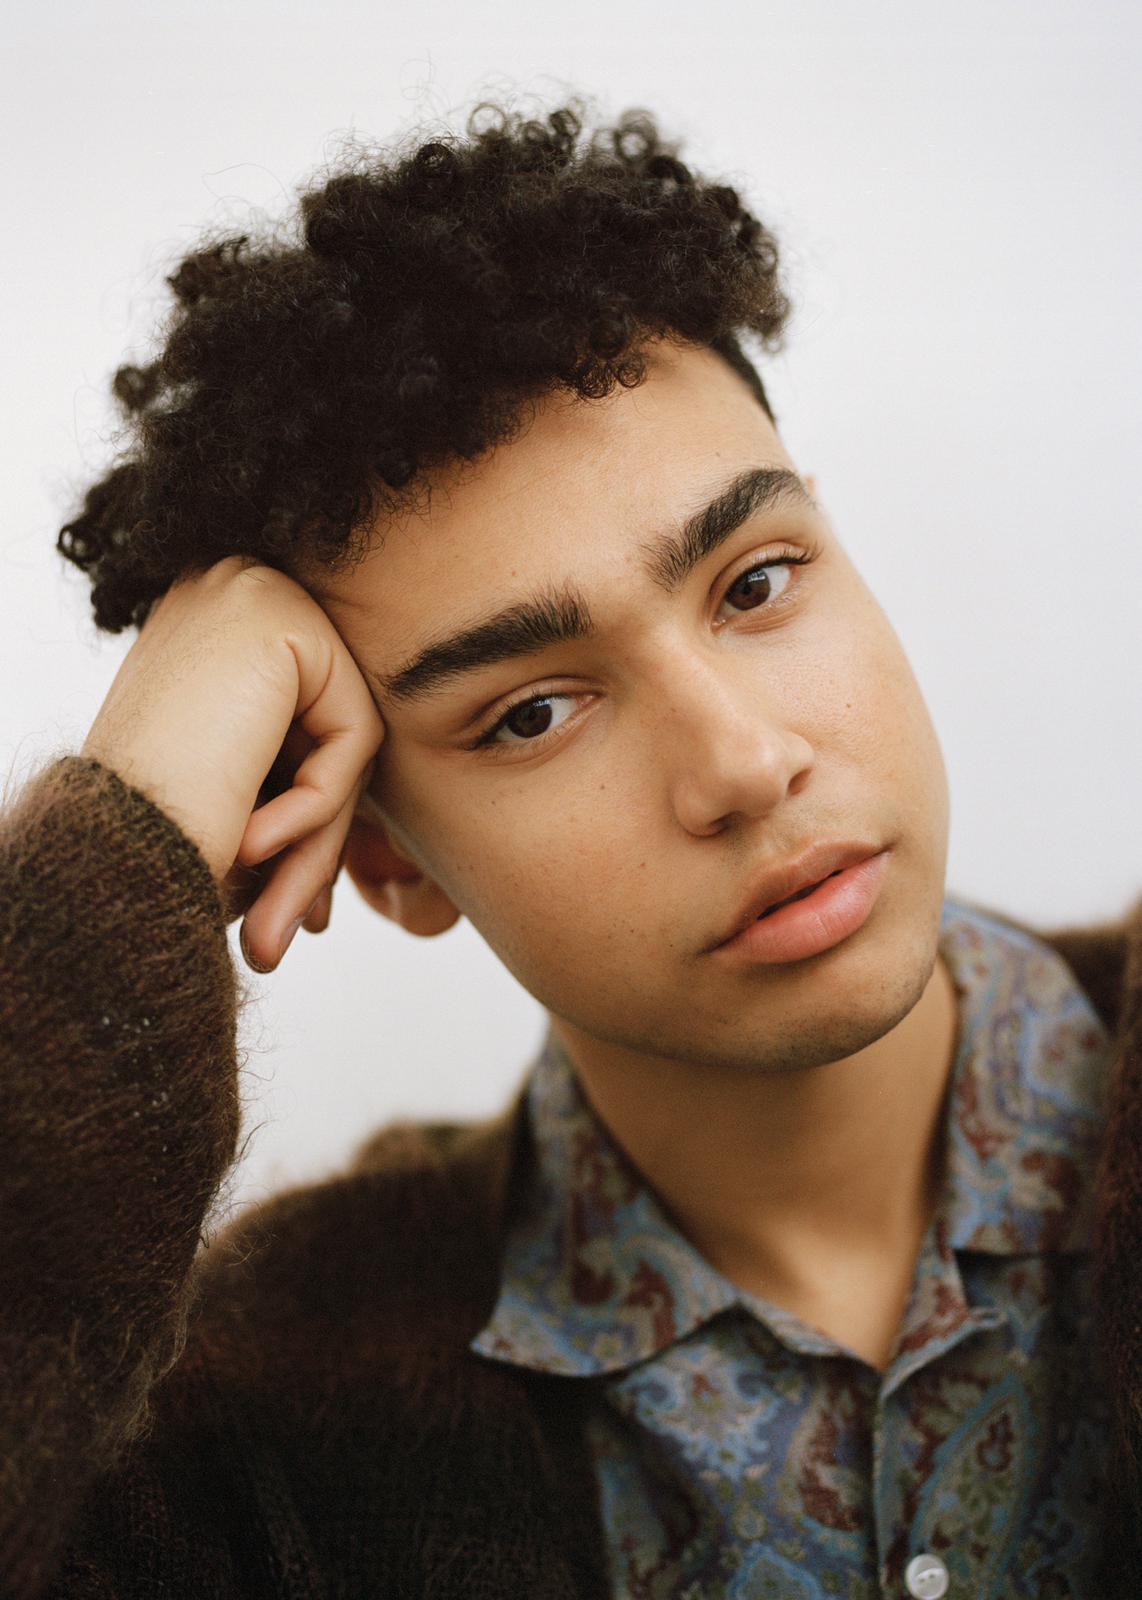 Archie Madekwe Bio, Age, Family, Girlfriend, Net Worth, Movies and TV Shows